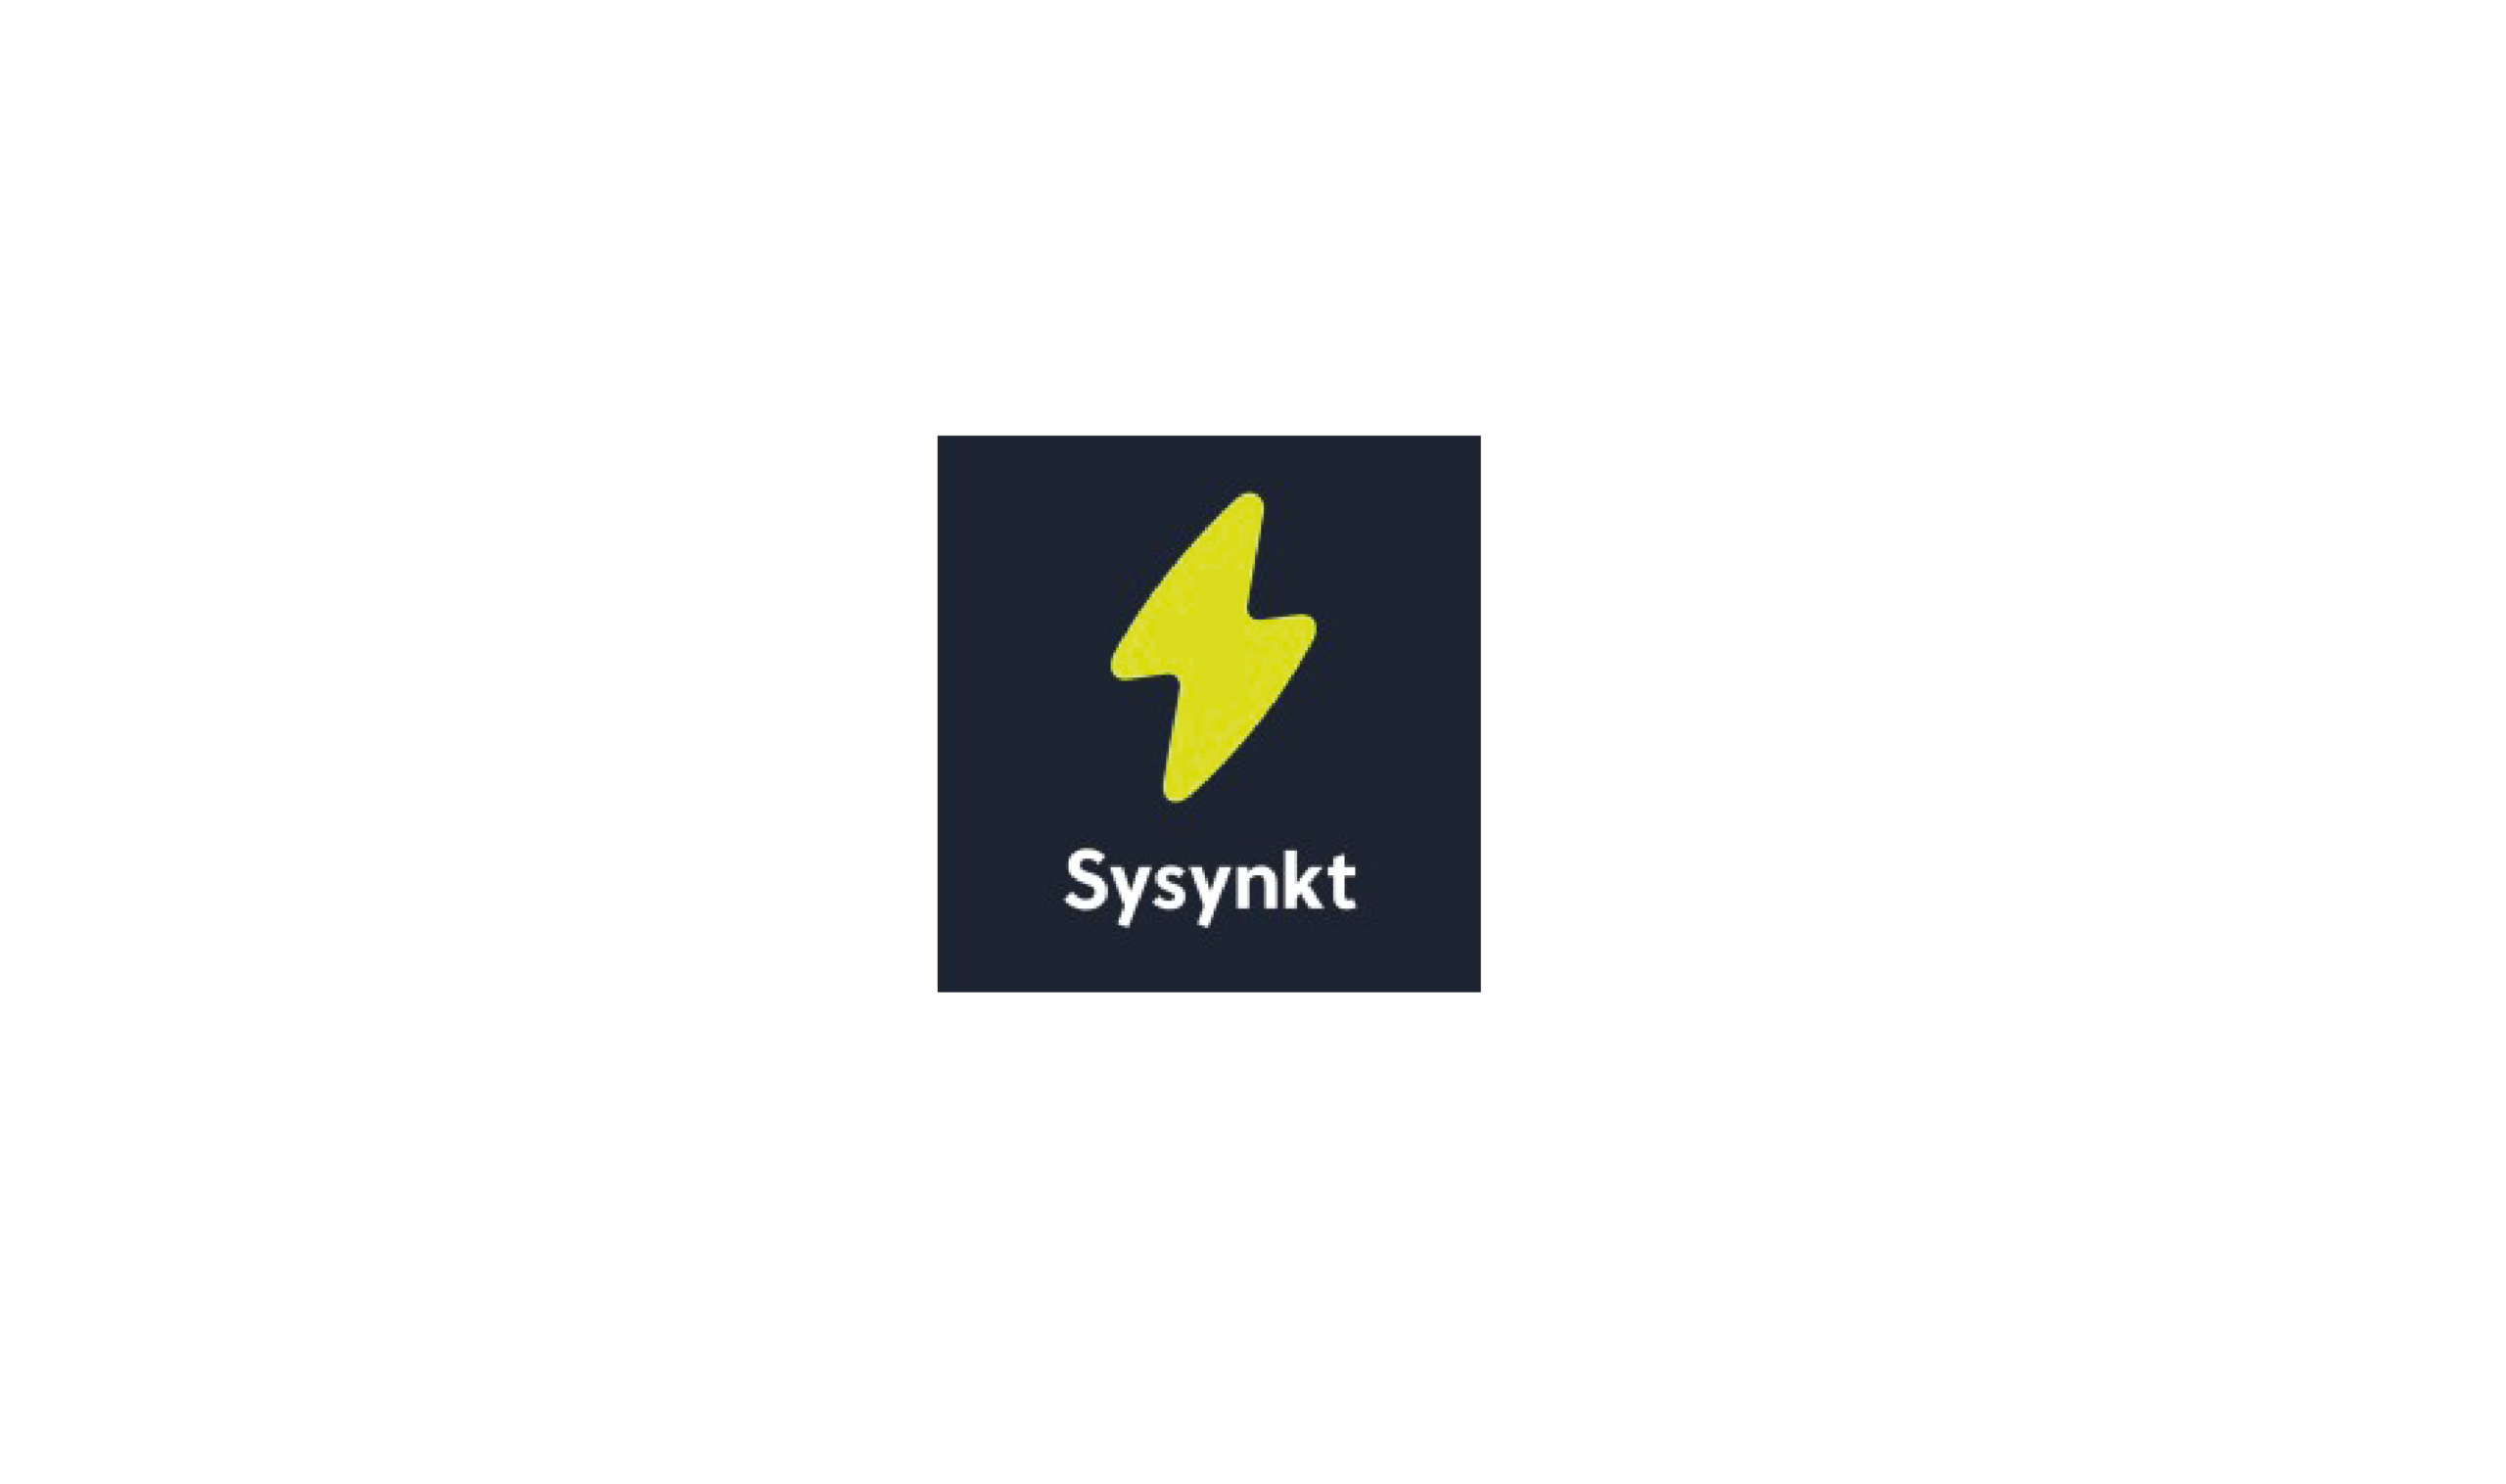 The Sysynkt logo